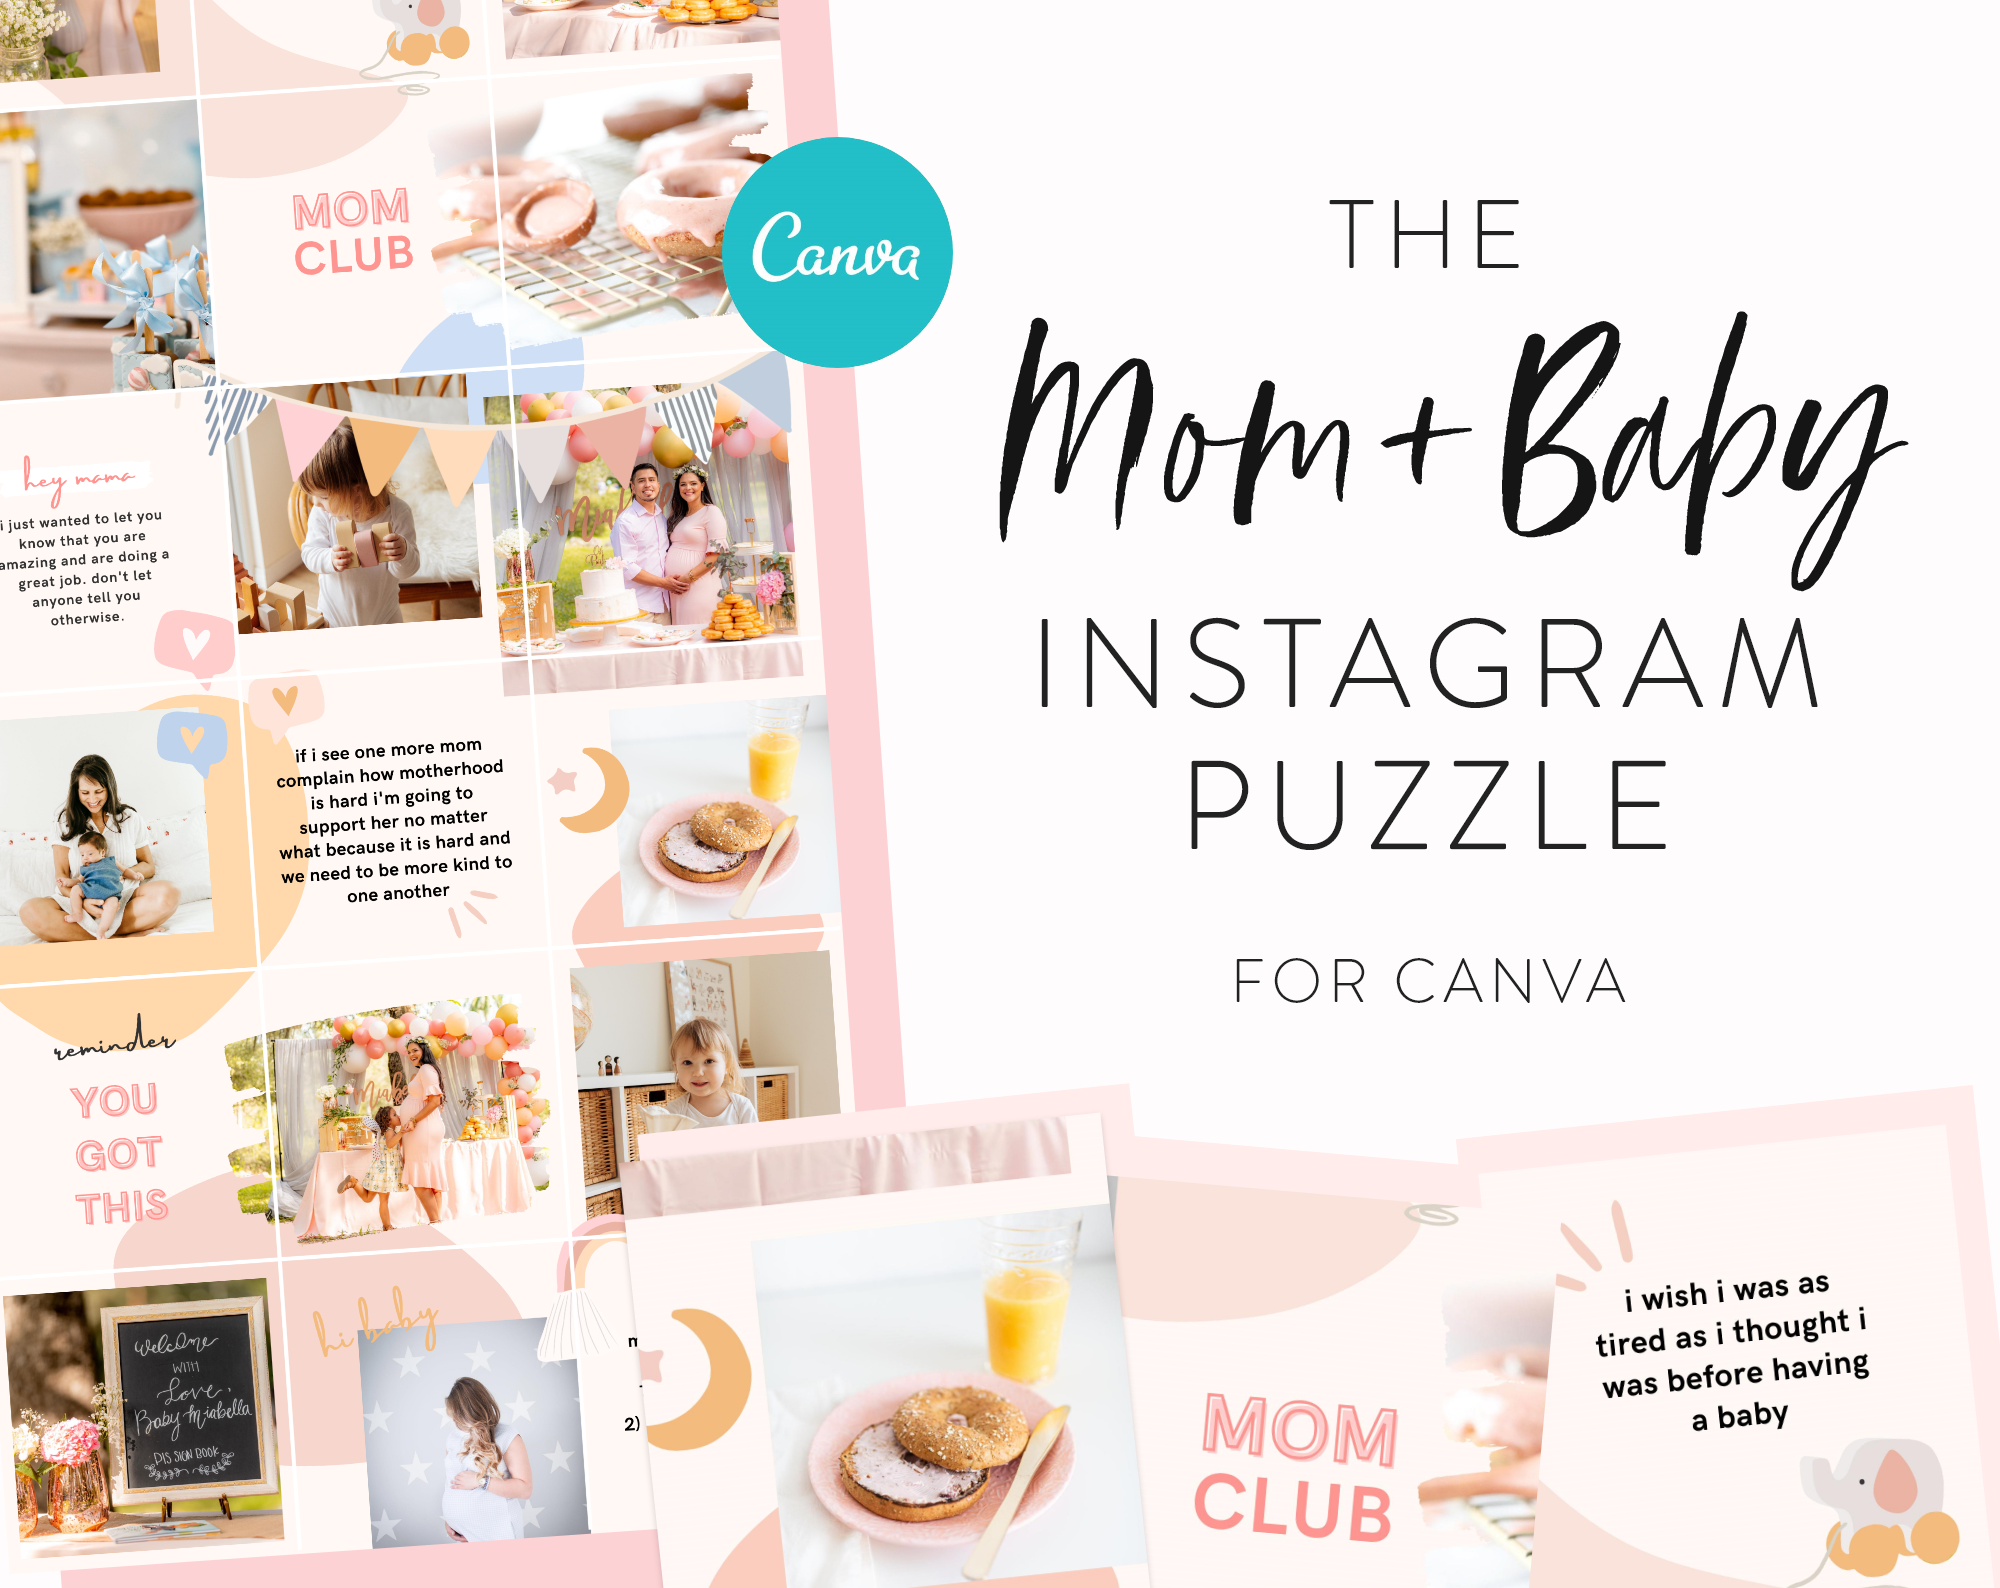 mom-life-Instagram-puzzle-for-canva-templates